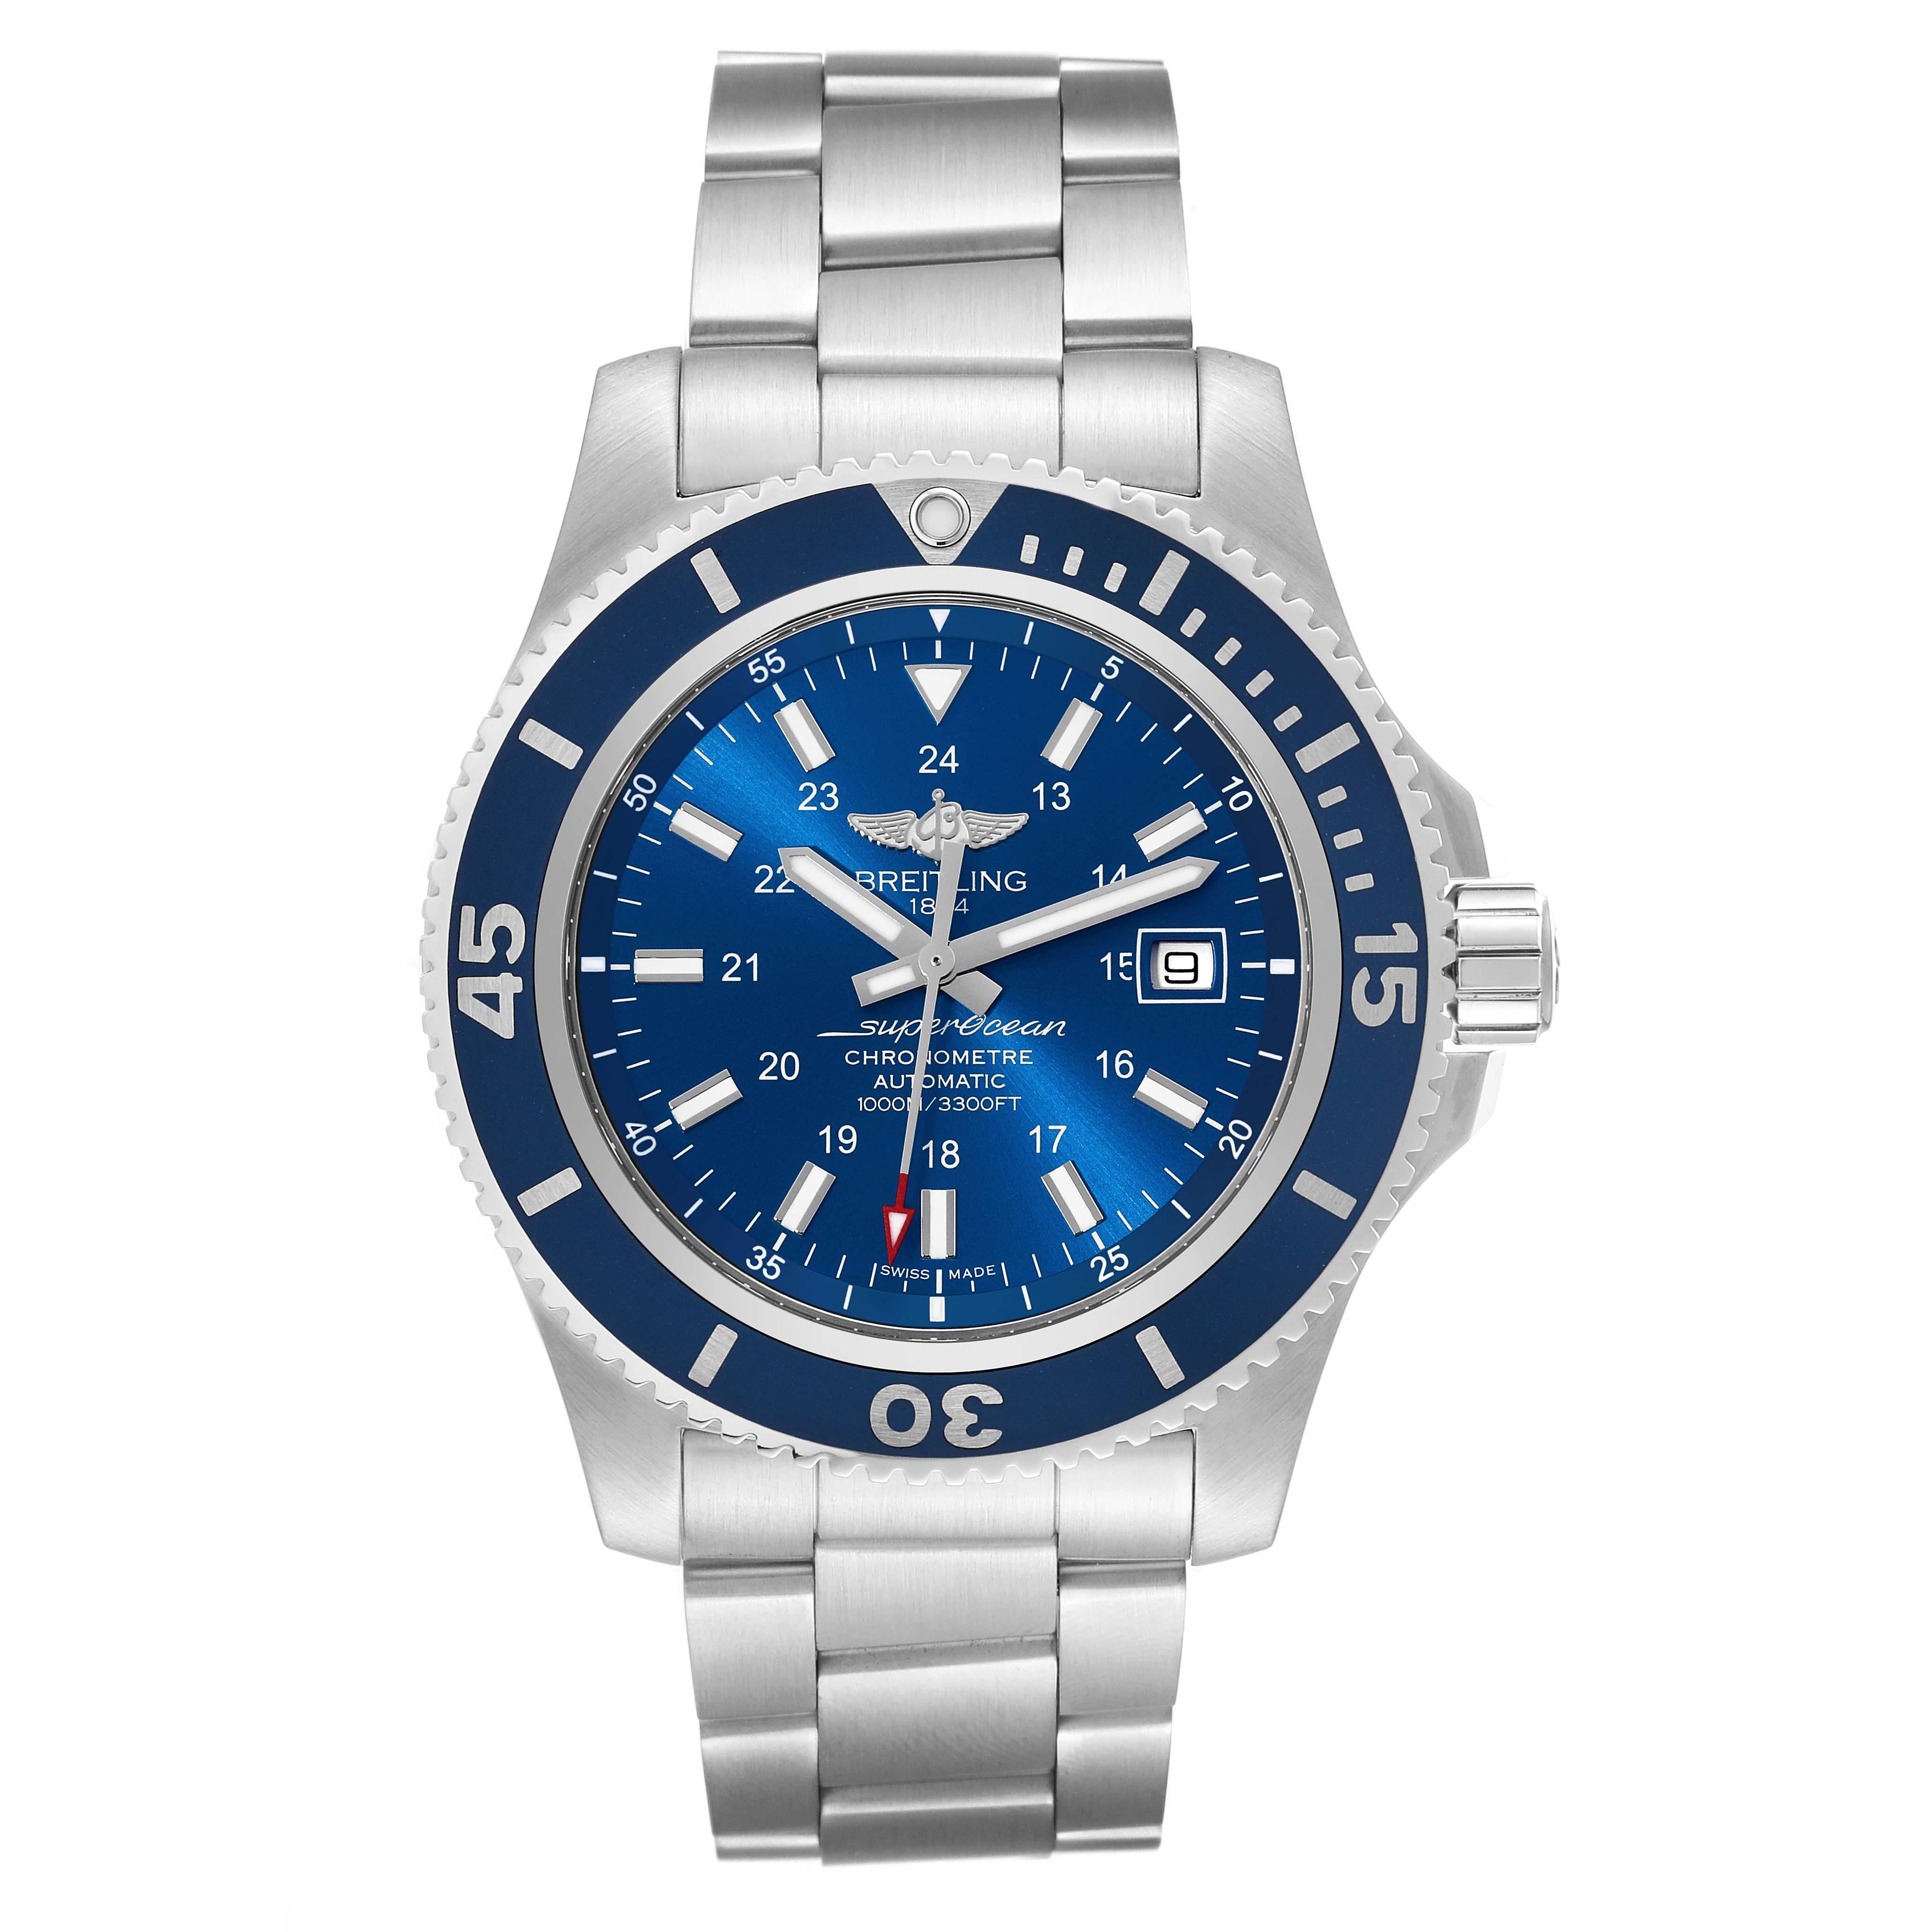 Breitling Superocean II 44 Blue Dial Steel Mens Watch A17392 Box Card. Automatic self-winding movement. Stainless steel case 44.0 mm in diameter. Case thickness: 14.2 mm. Blue stainless steel unidirectional revolving bezel. 0-60 elapsed-time.